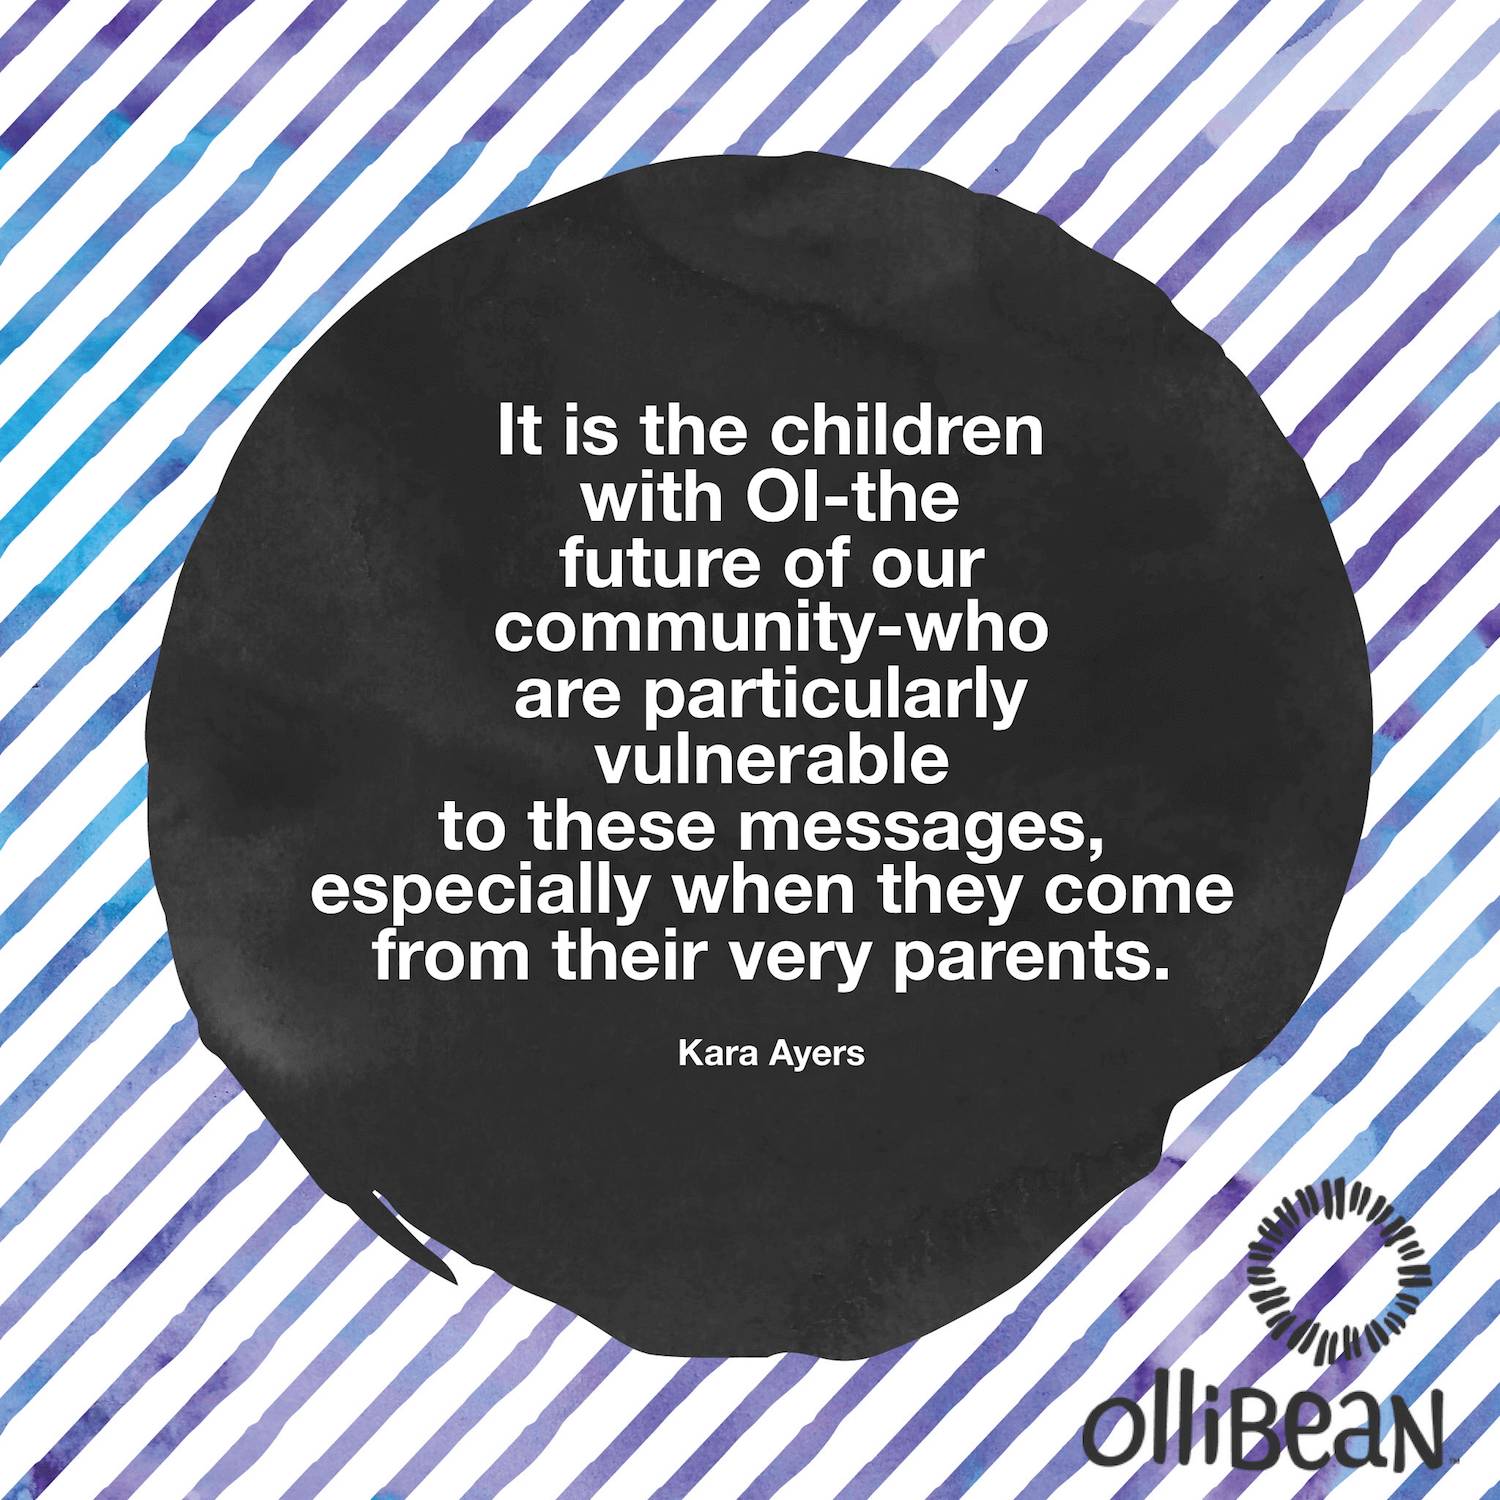 It is the children with OI-the future of our community-who are particularly vulnerable to these messages, especially when they come from their very parents. Kara Ayers on Ollibean